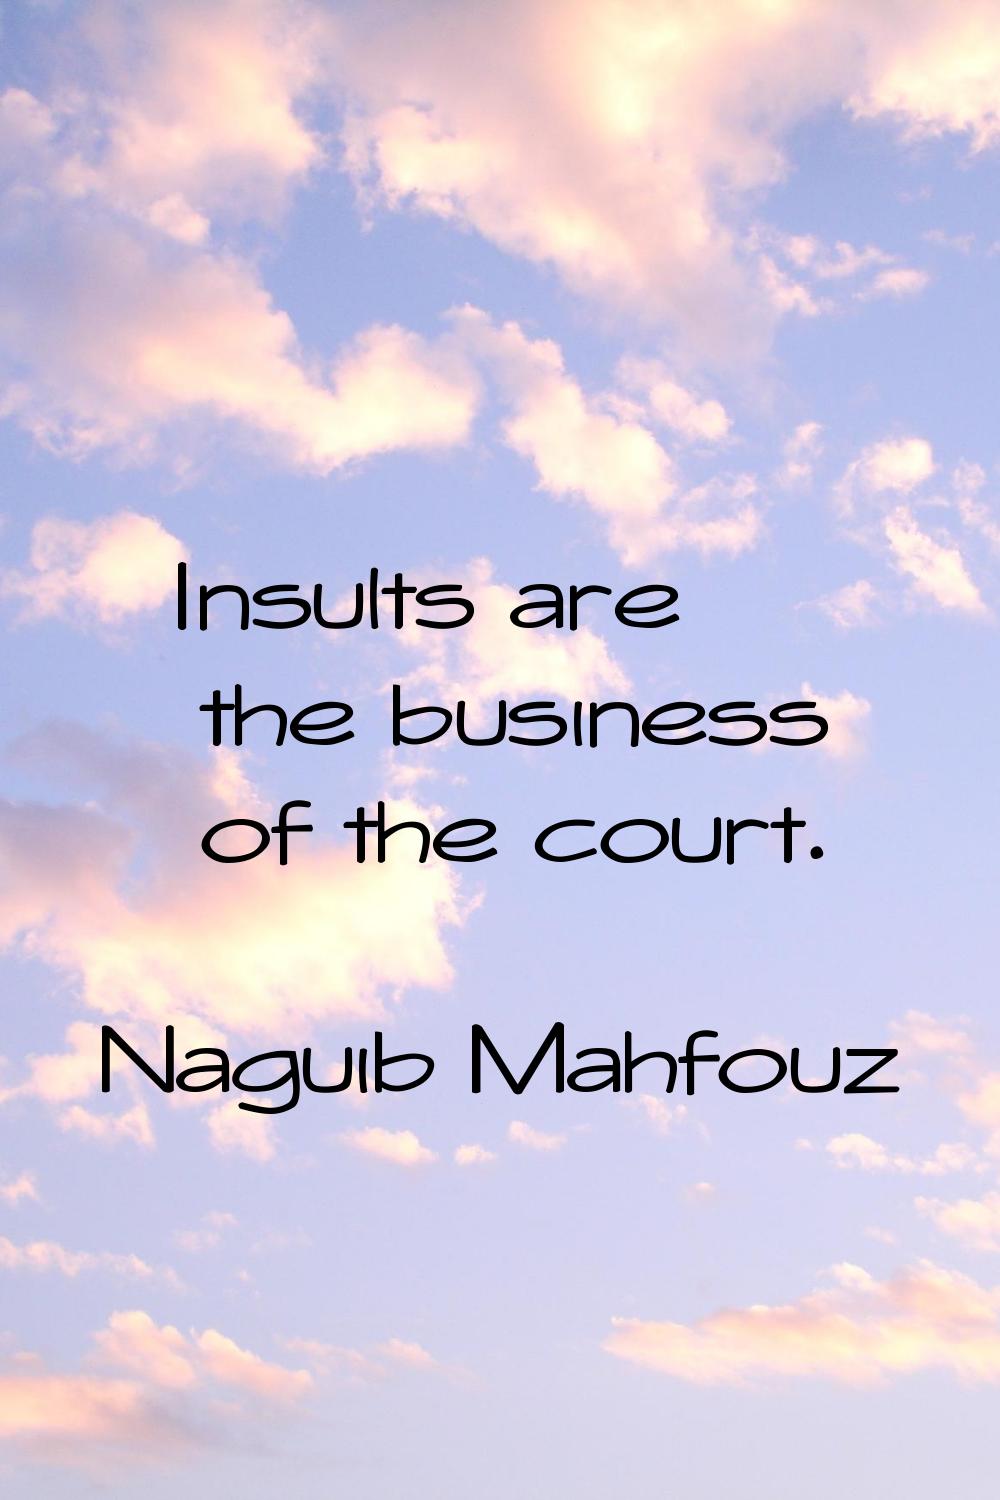 Insults are the business of the court.